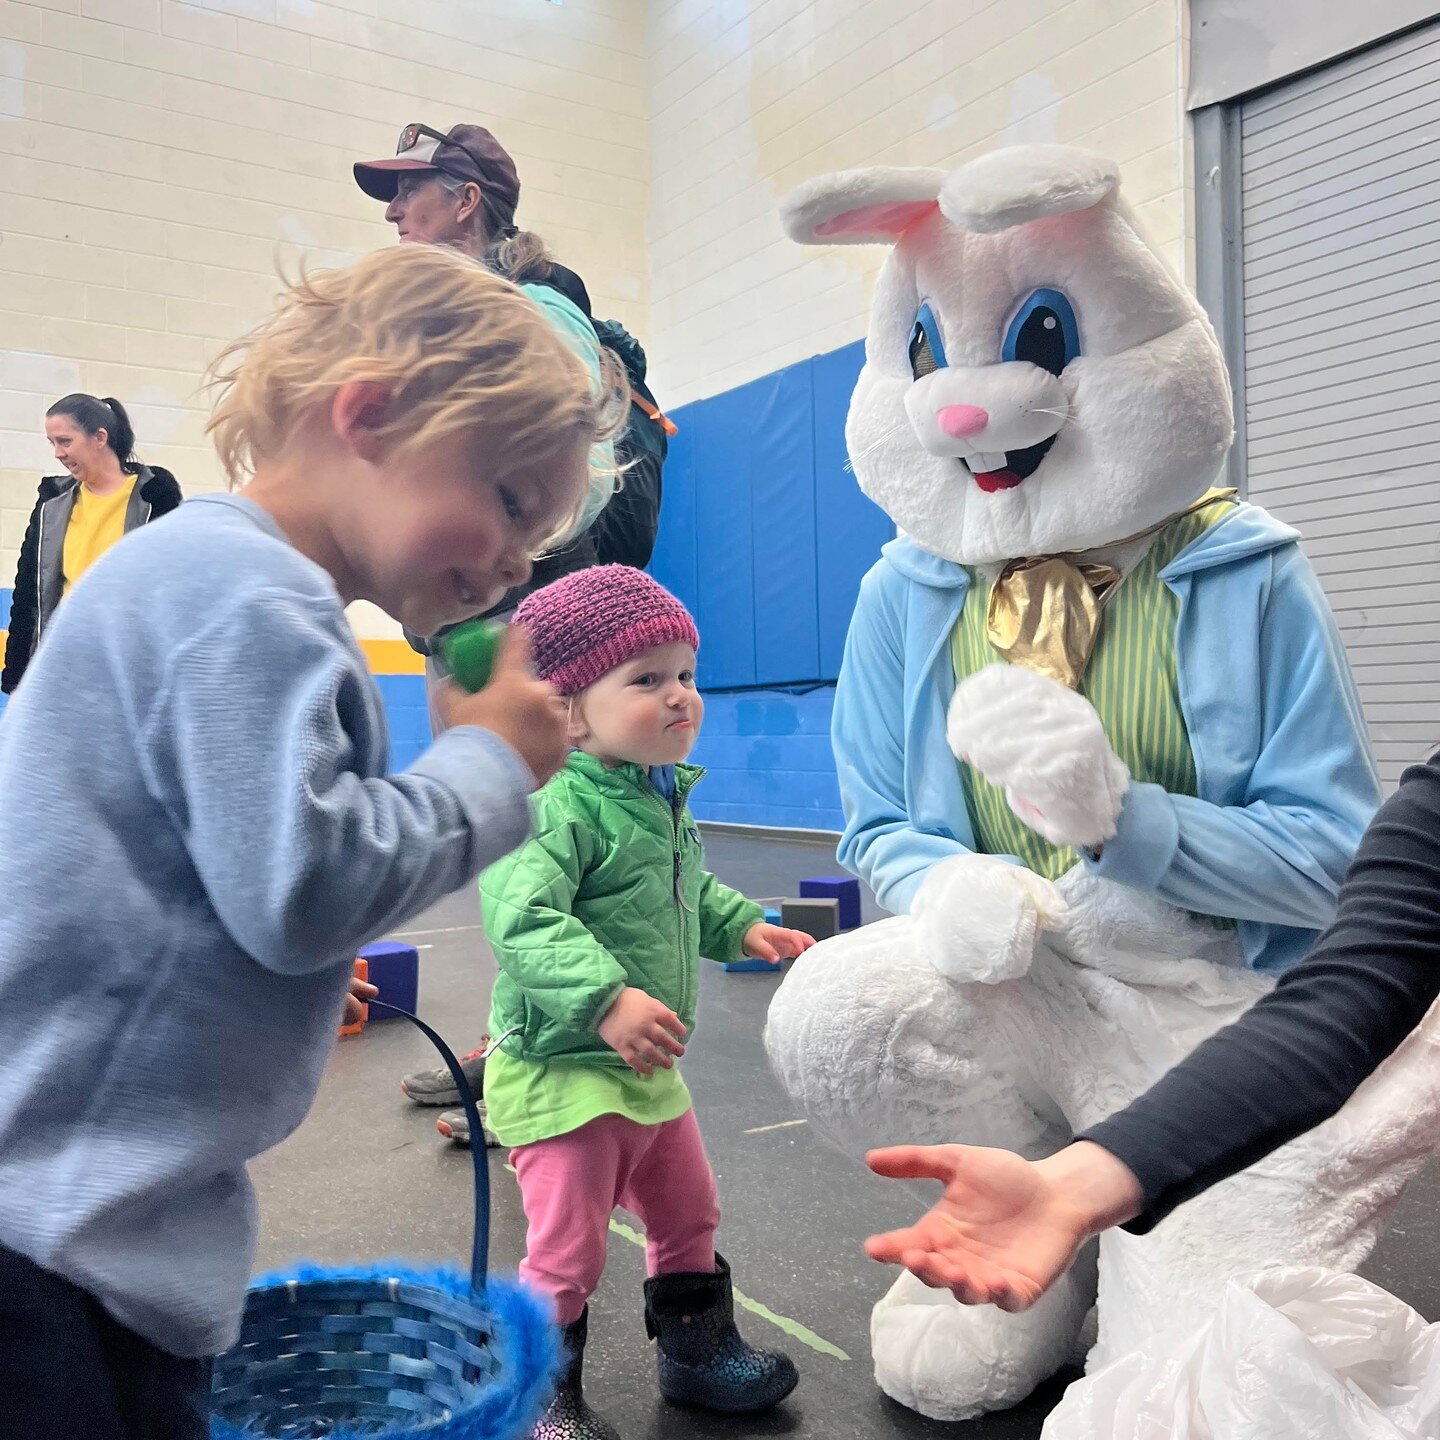 The kids had an EGG-cellent time on Saturday -- and families can look forward to more Drop-In Play tomorrow (3/26) and Thursday (3/28). 

Additional Spring Break activities include: 
- Outdoor Leadership's retreat to Moab
- Teen Center's field trip t